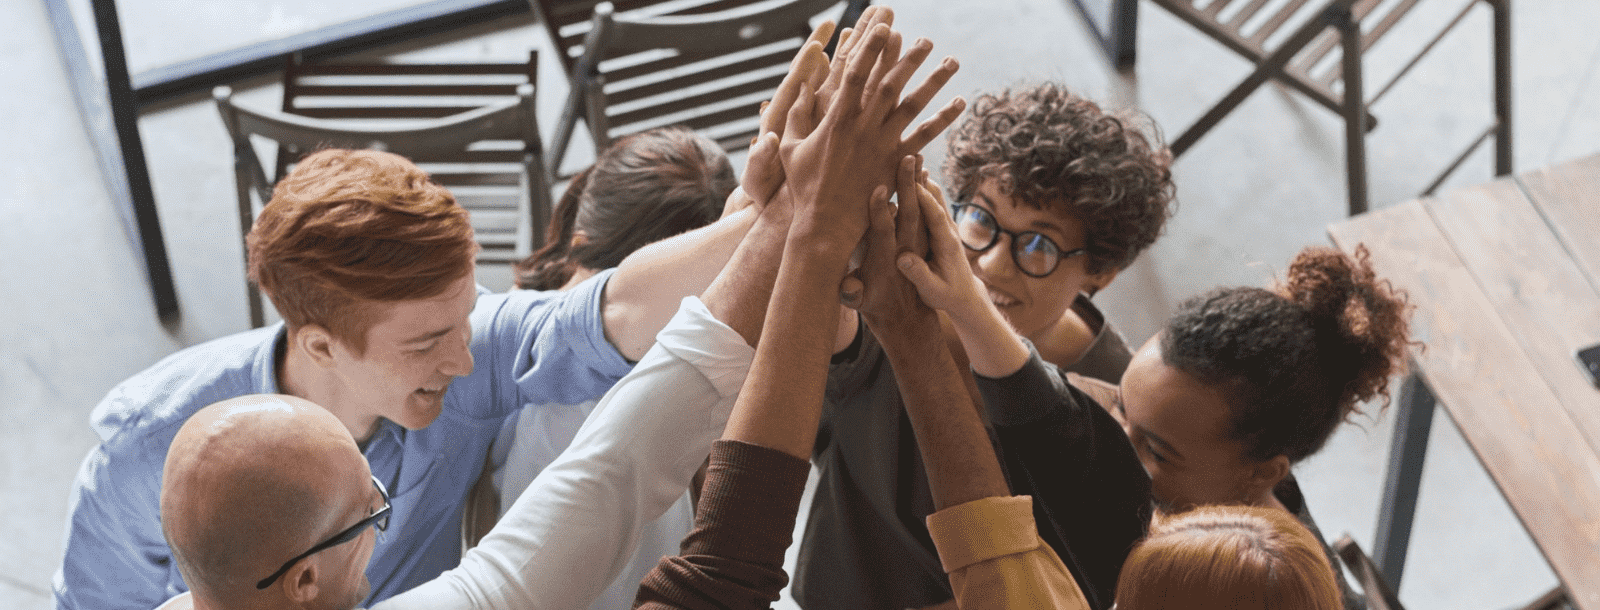 Stock photo: group of people in huddle with hands touching